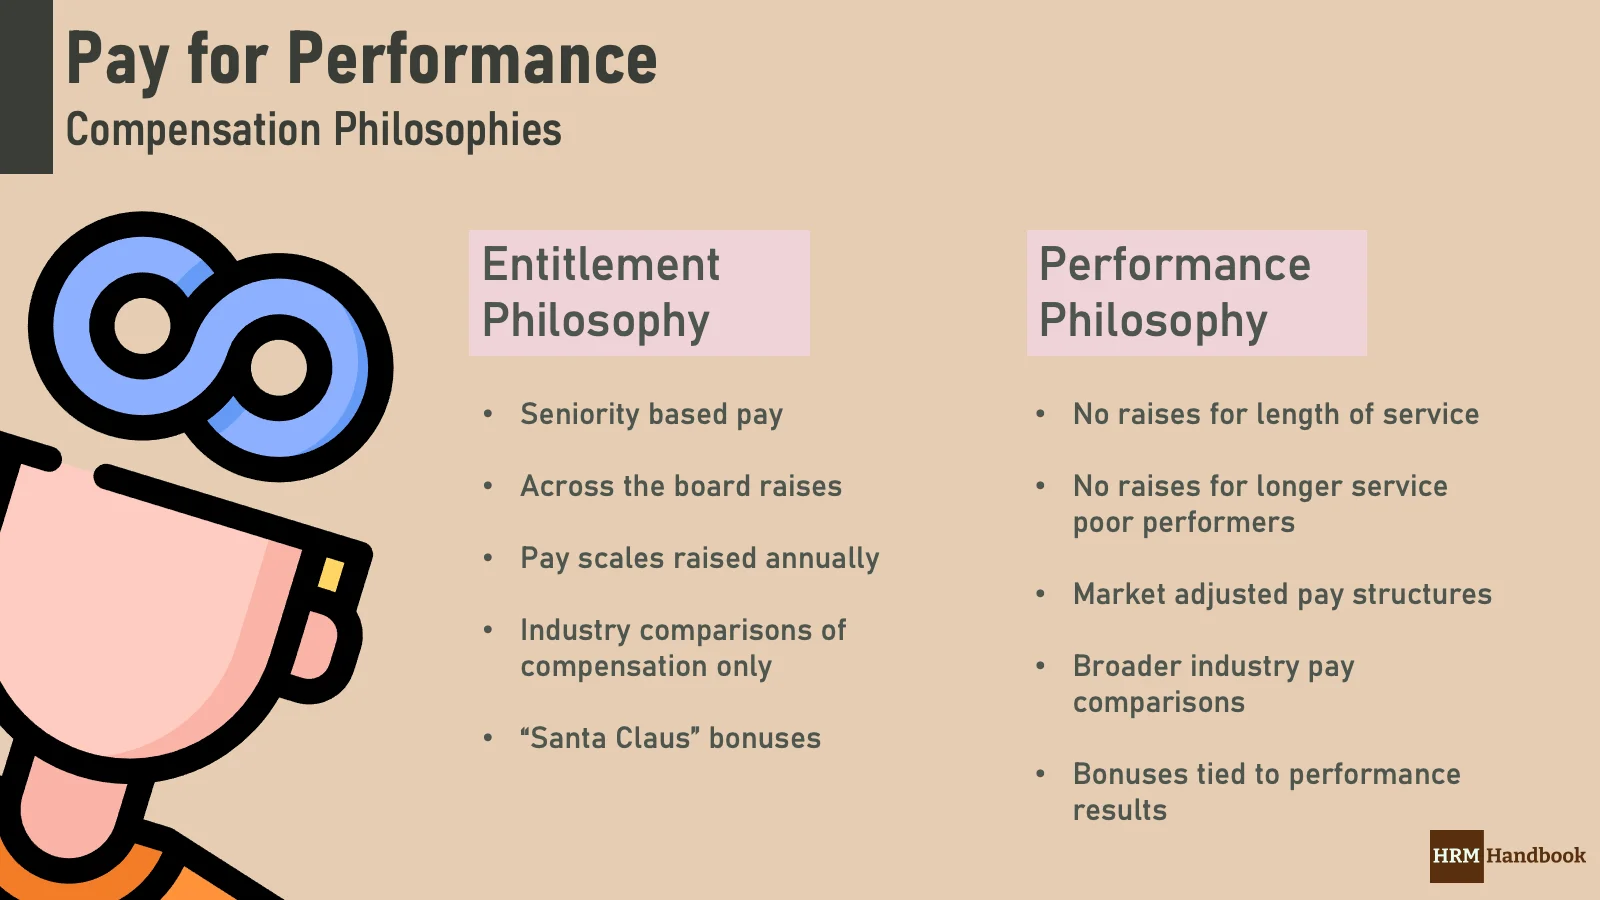 There are two key philosophies in Compensation and Benefits, Entitlement One and Performance One